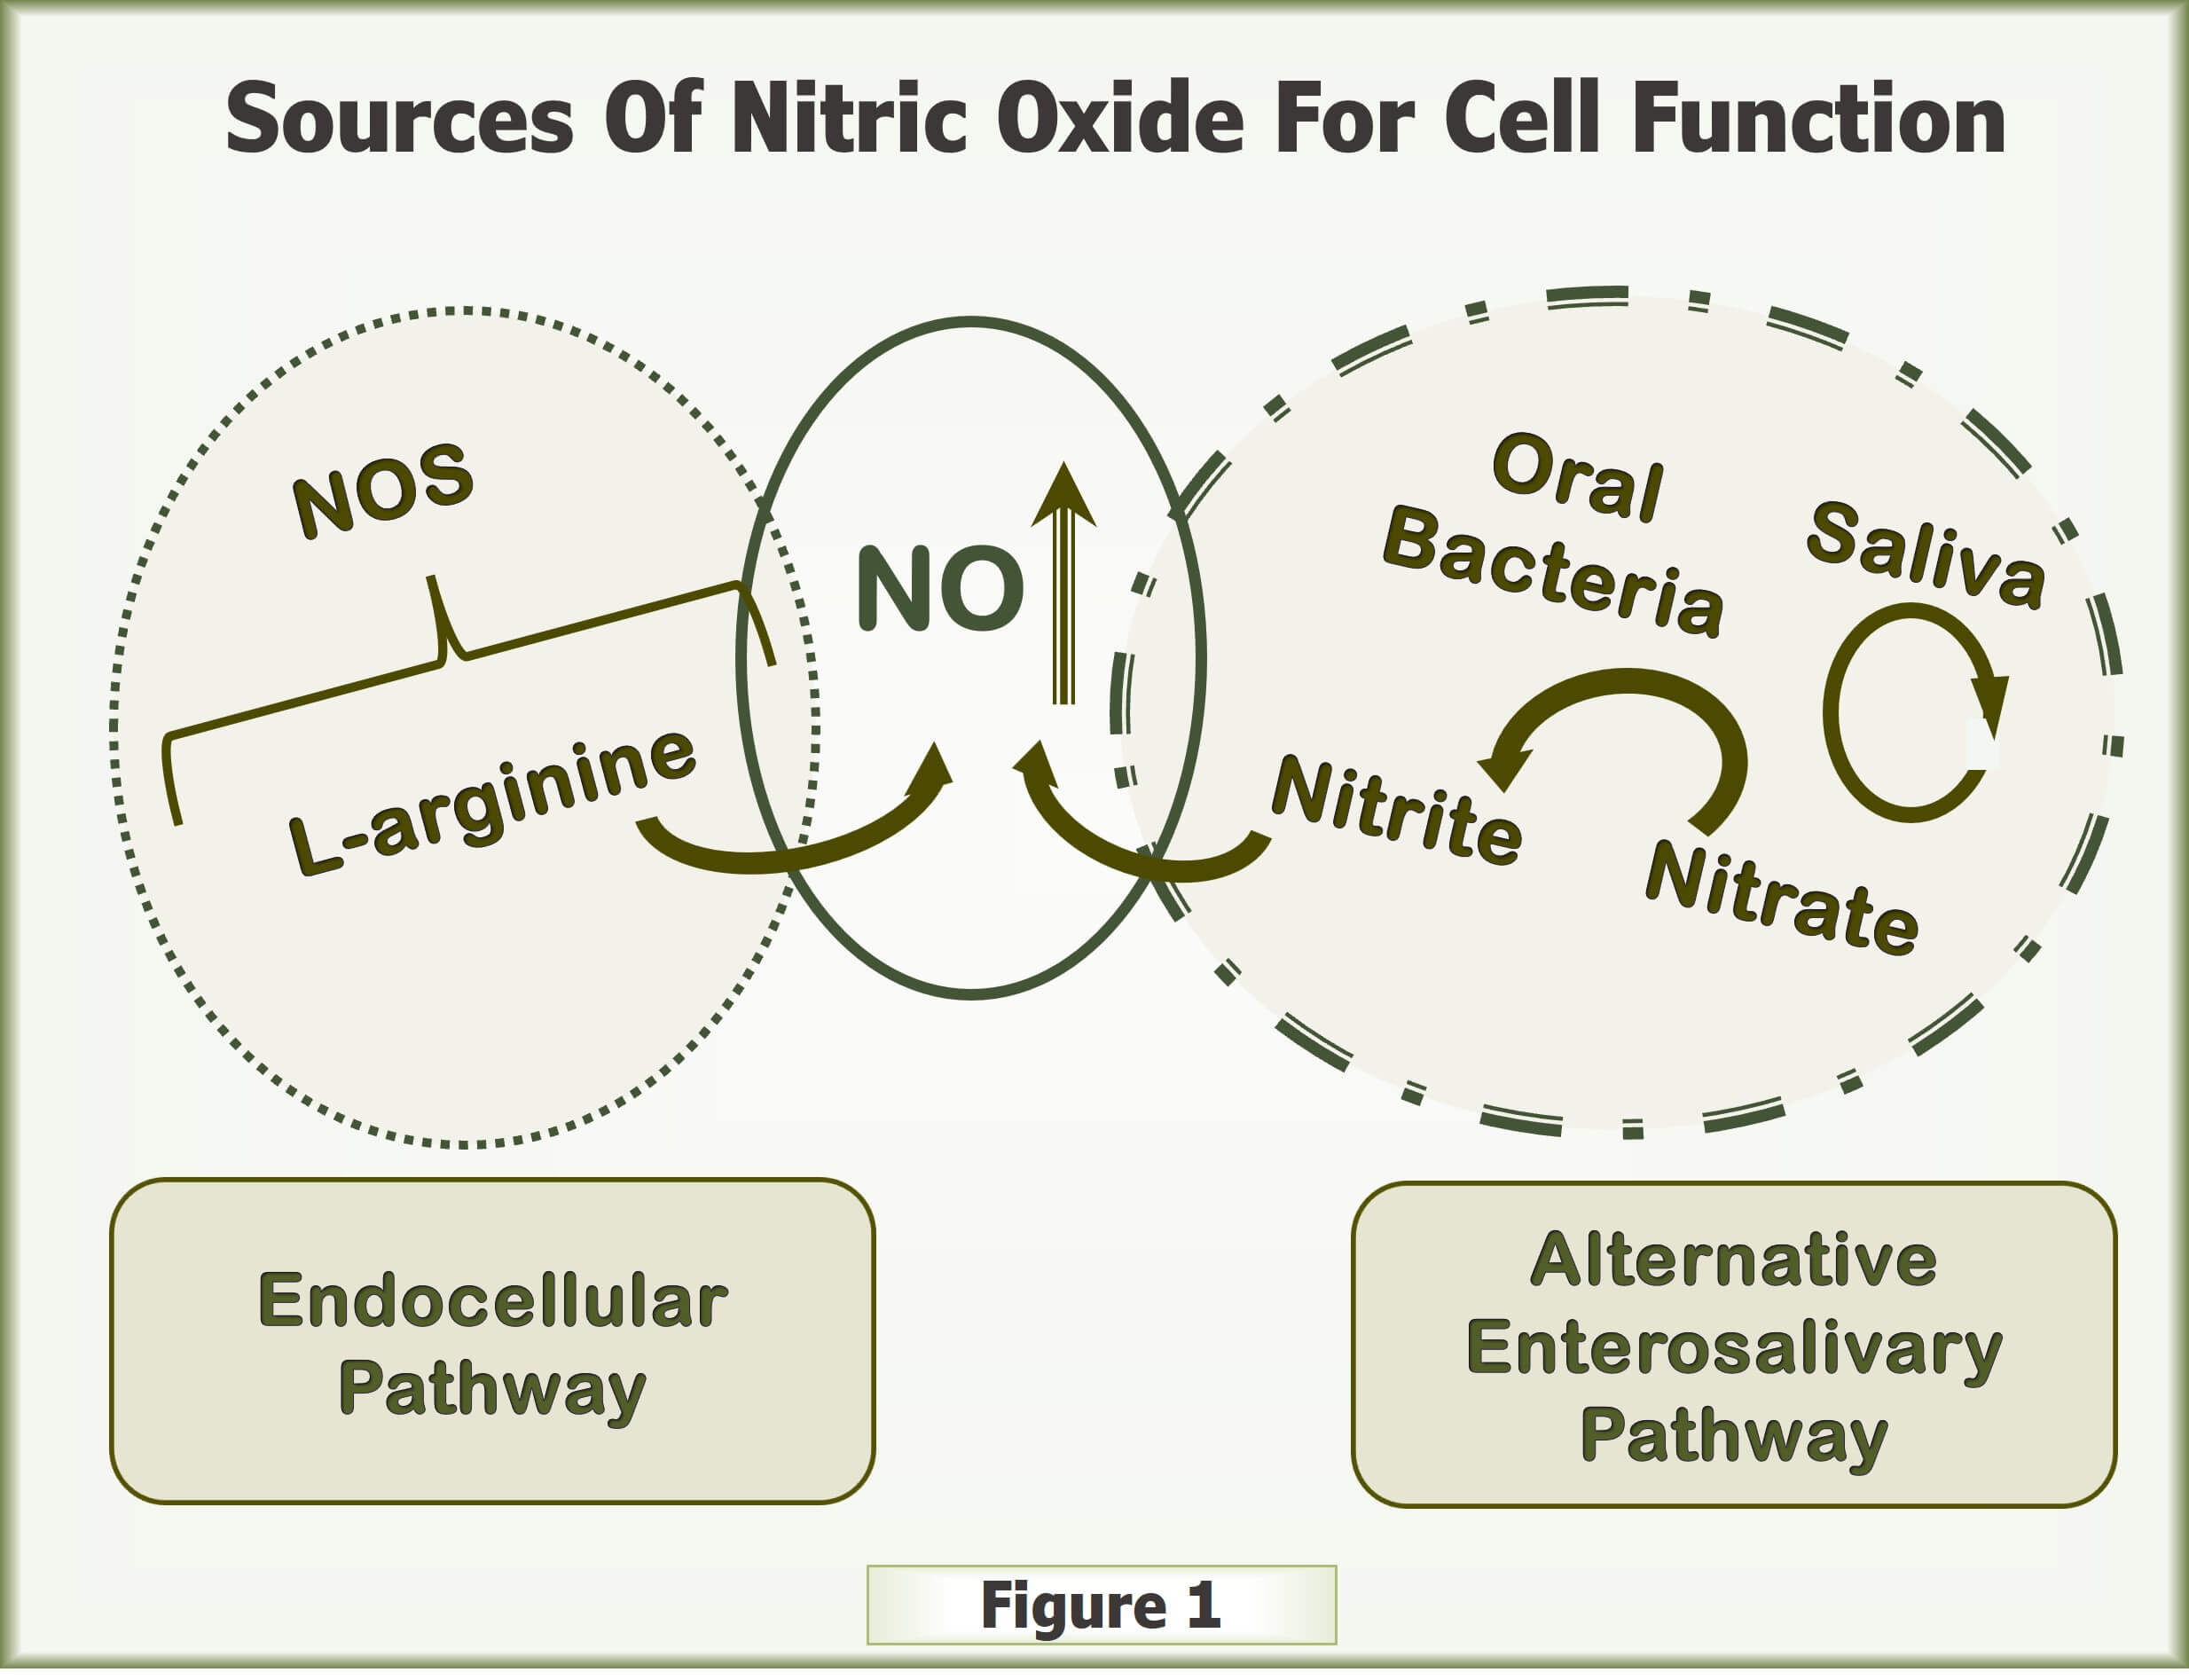 Sources Of Nitric Oxide For Cell Function text written